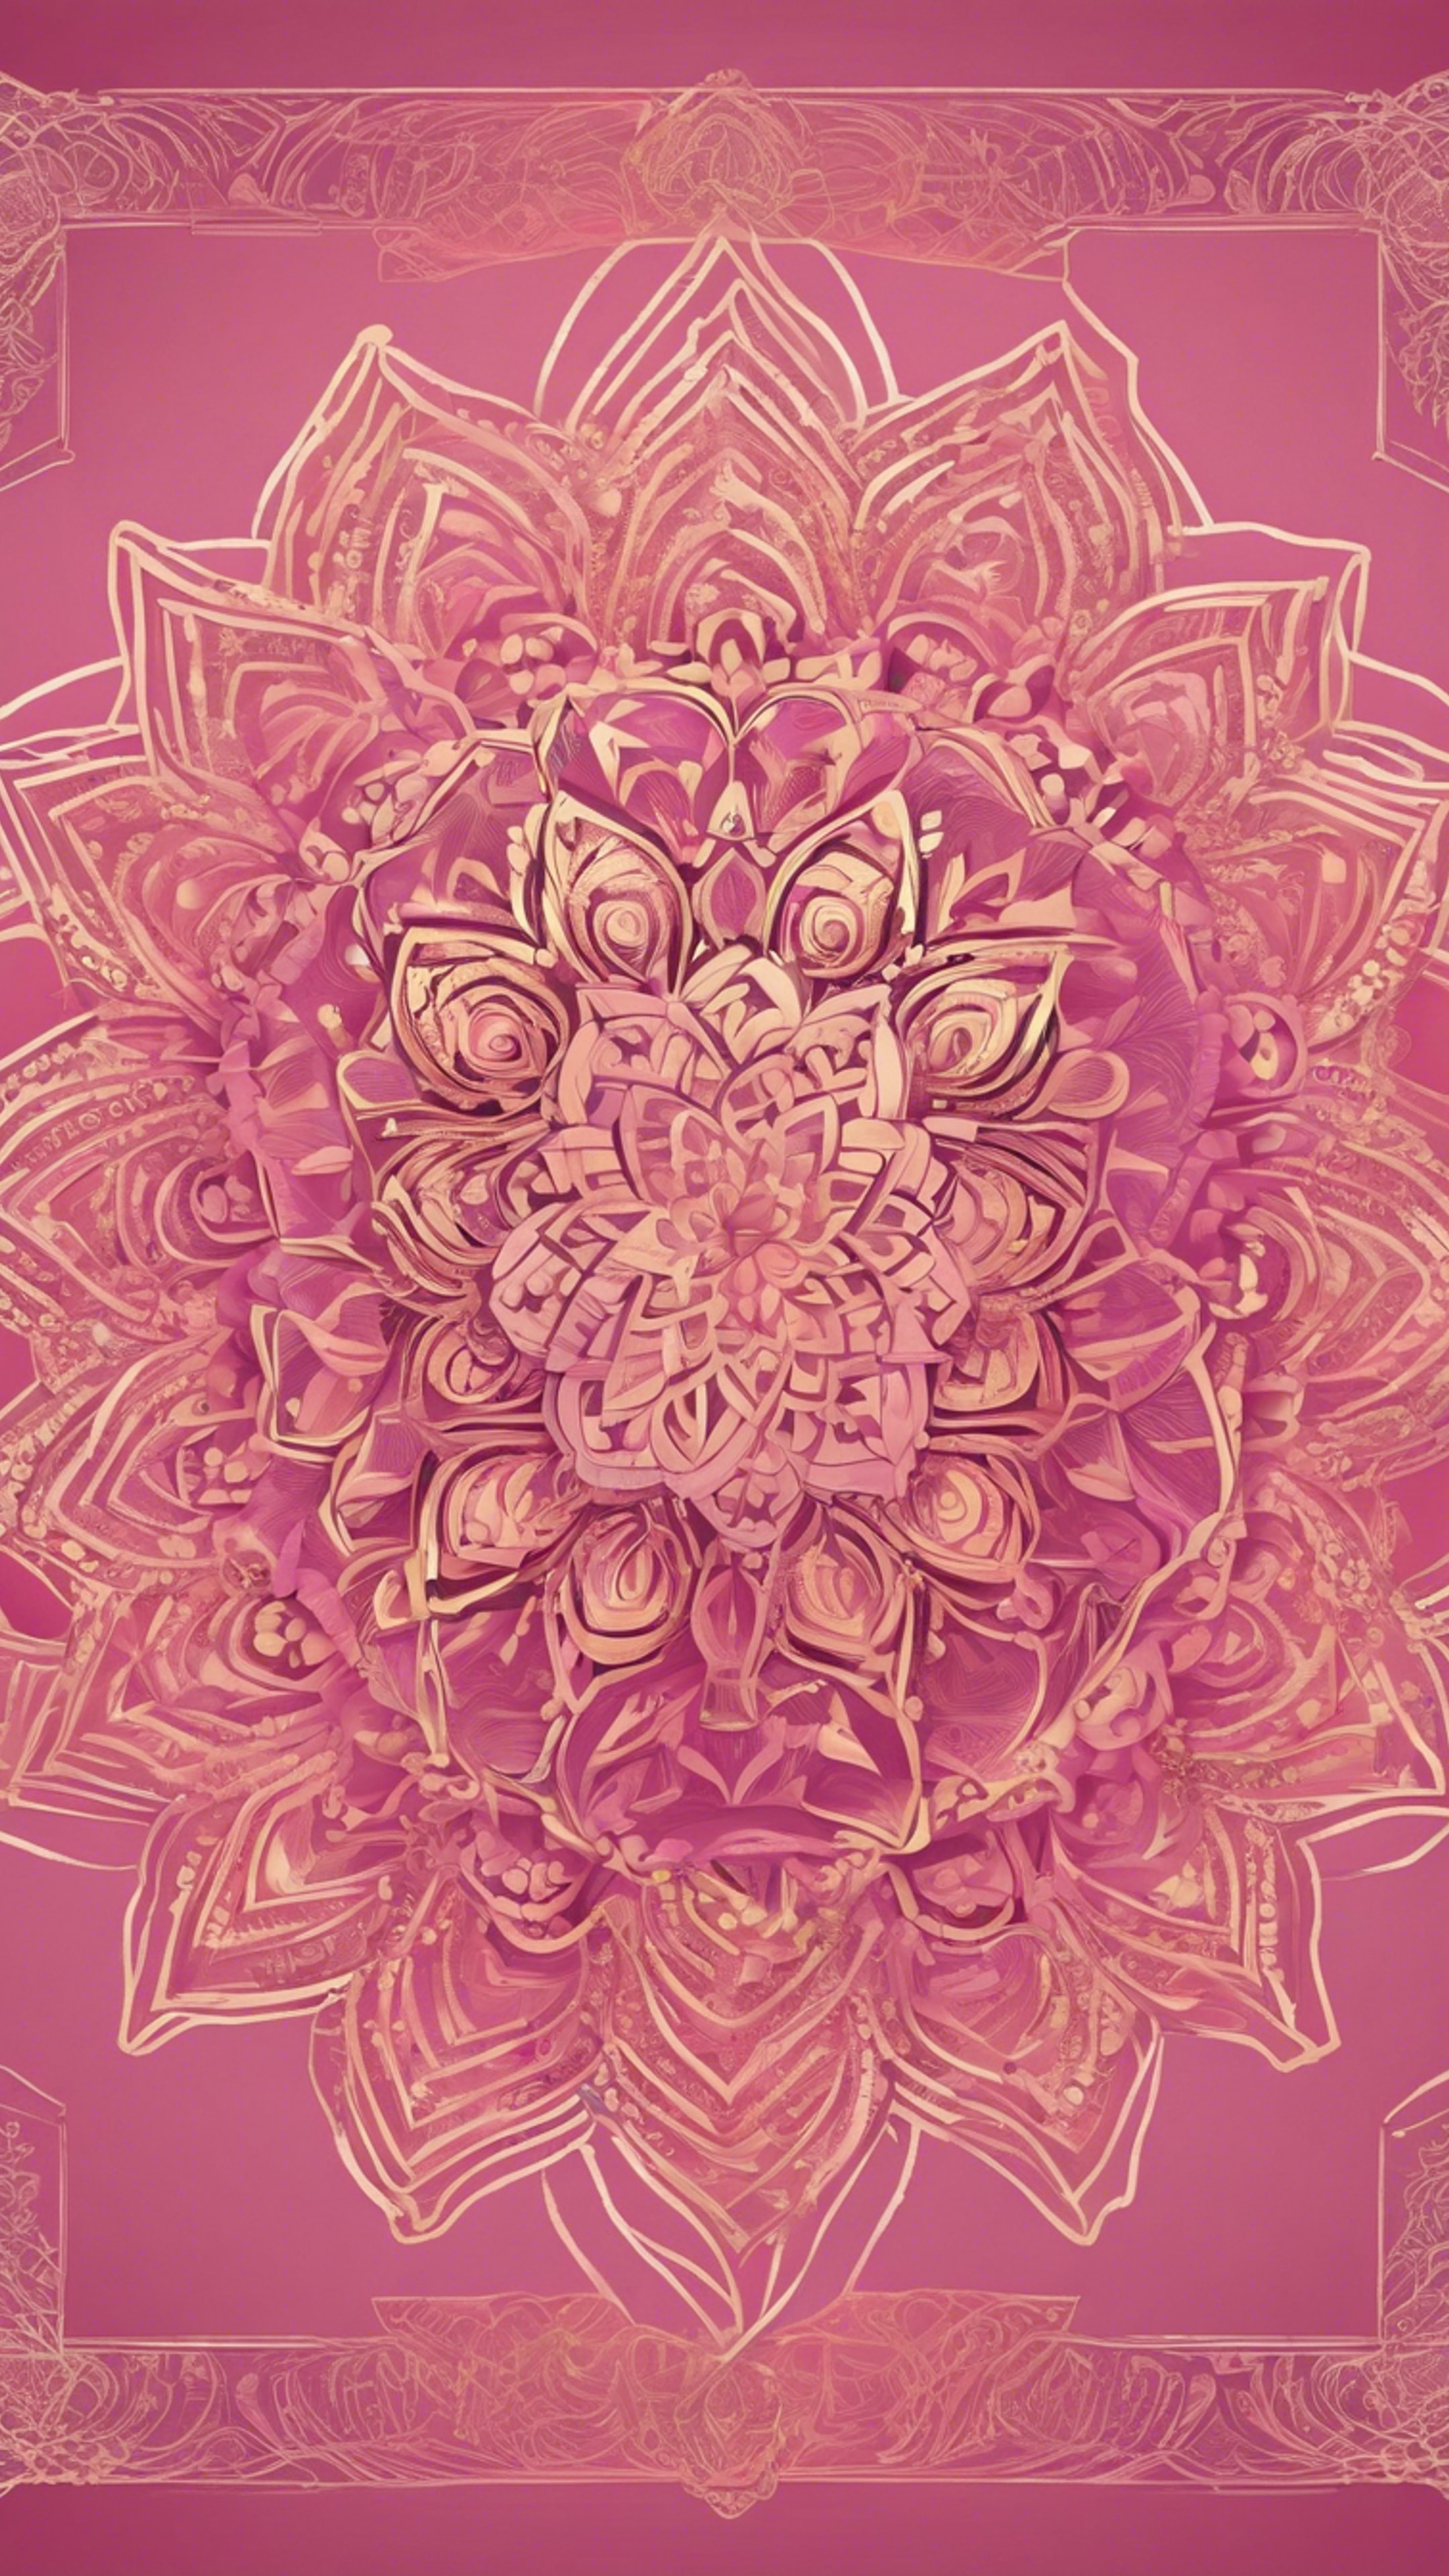 A pink and gold mandala design flourishing with intricate line art and vibrant colors. Fond d'écran[7f3fcd6ed997428c89d3]